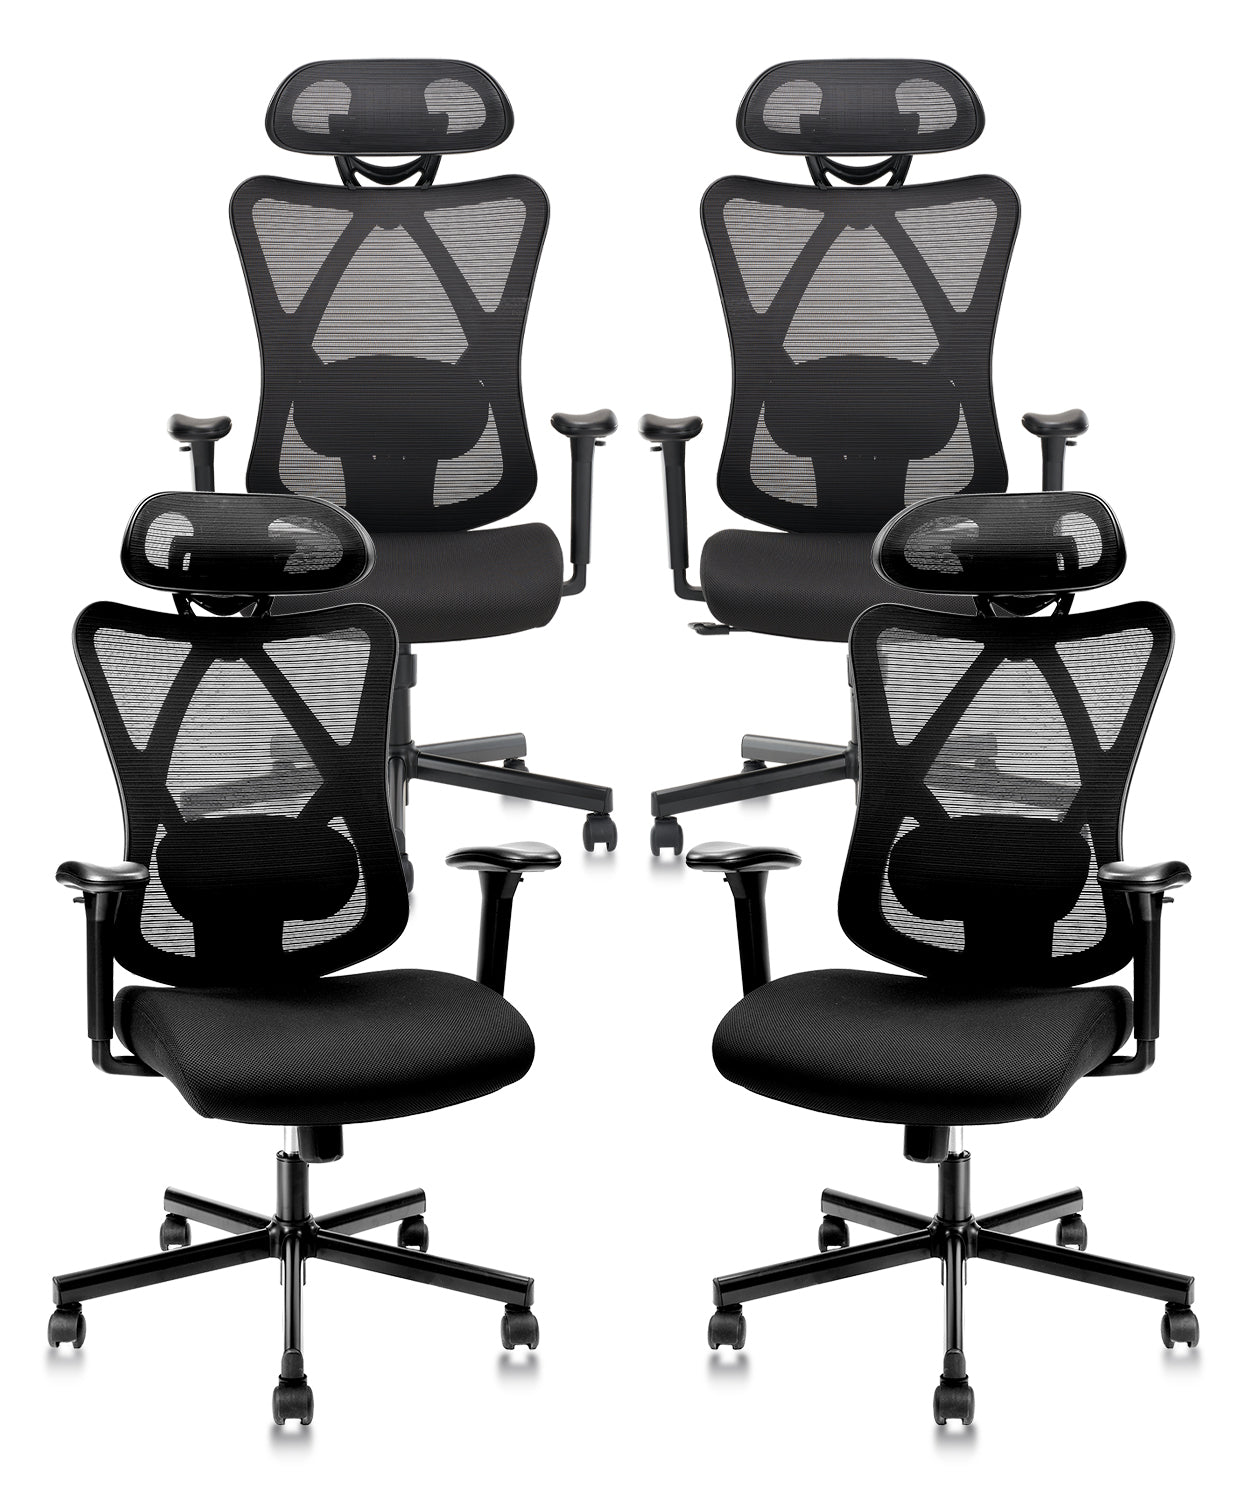 CLATINA Ergonomic Mesh Office Chair High Back Computer Desk Chair with Adjustable Head Arm Rest and Lumbar Support Executive Task Chair for Home Office and Gaming (Black)